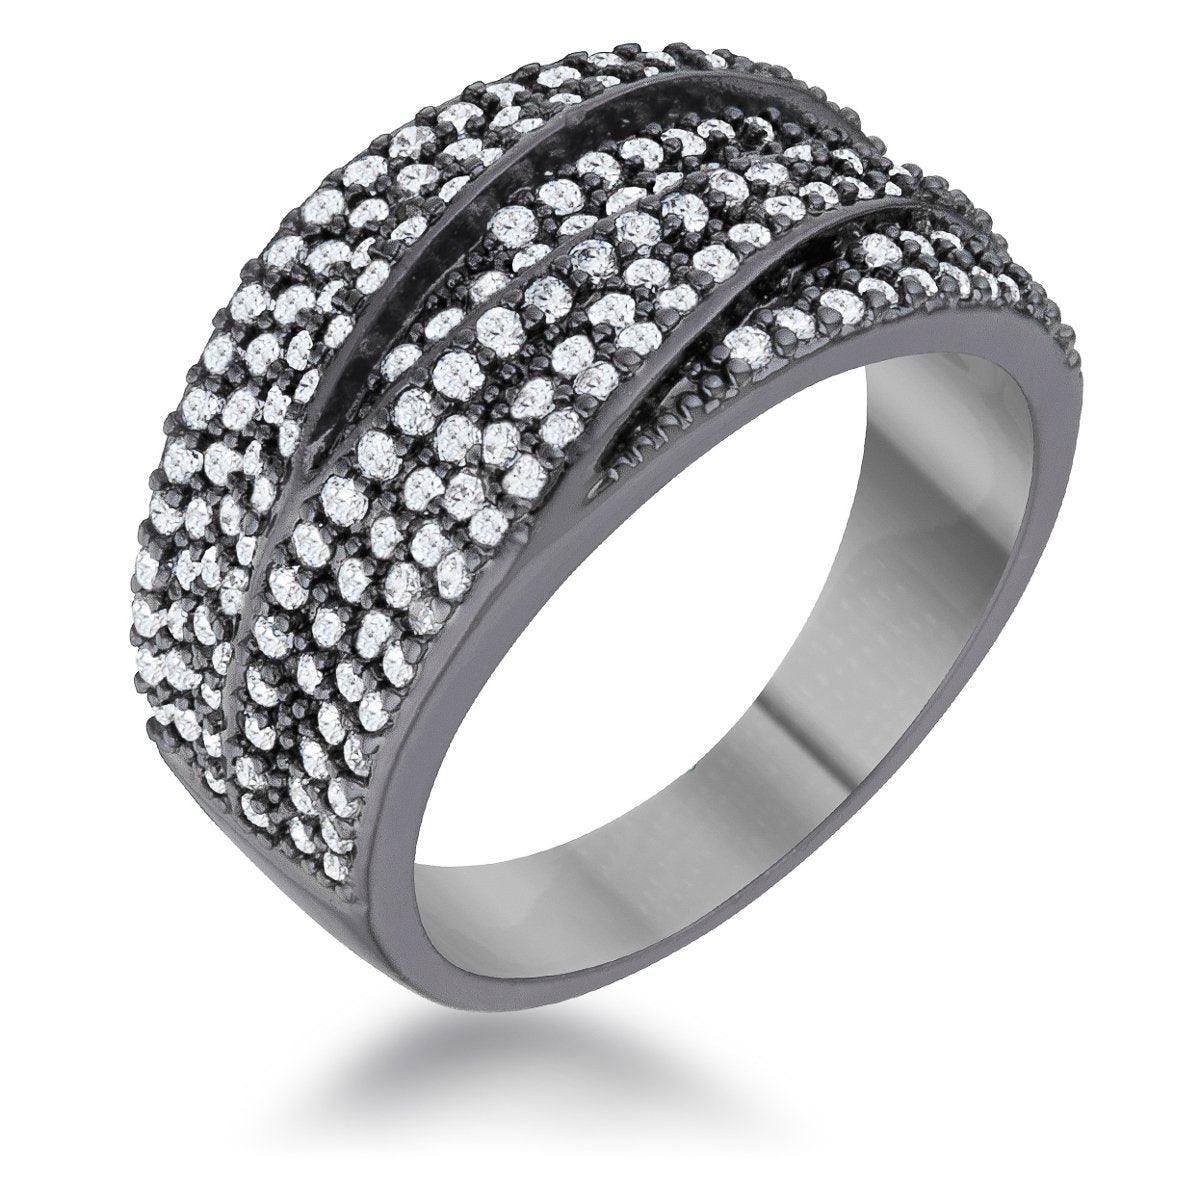 Kina 1.7ct Clear And Jet Black CZ Hematite Contemporary Cocktail Ring, <b>Size 5</b> - AMIClubwear